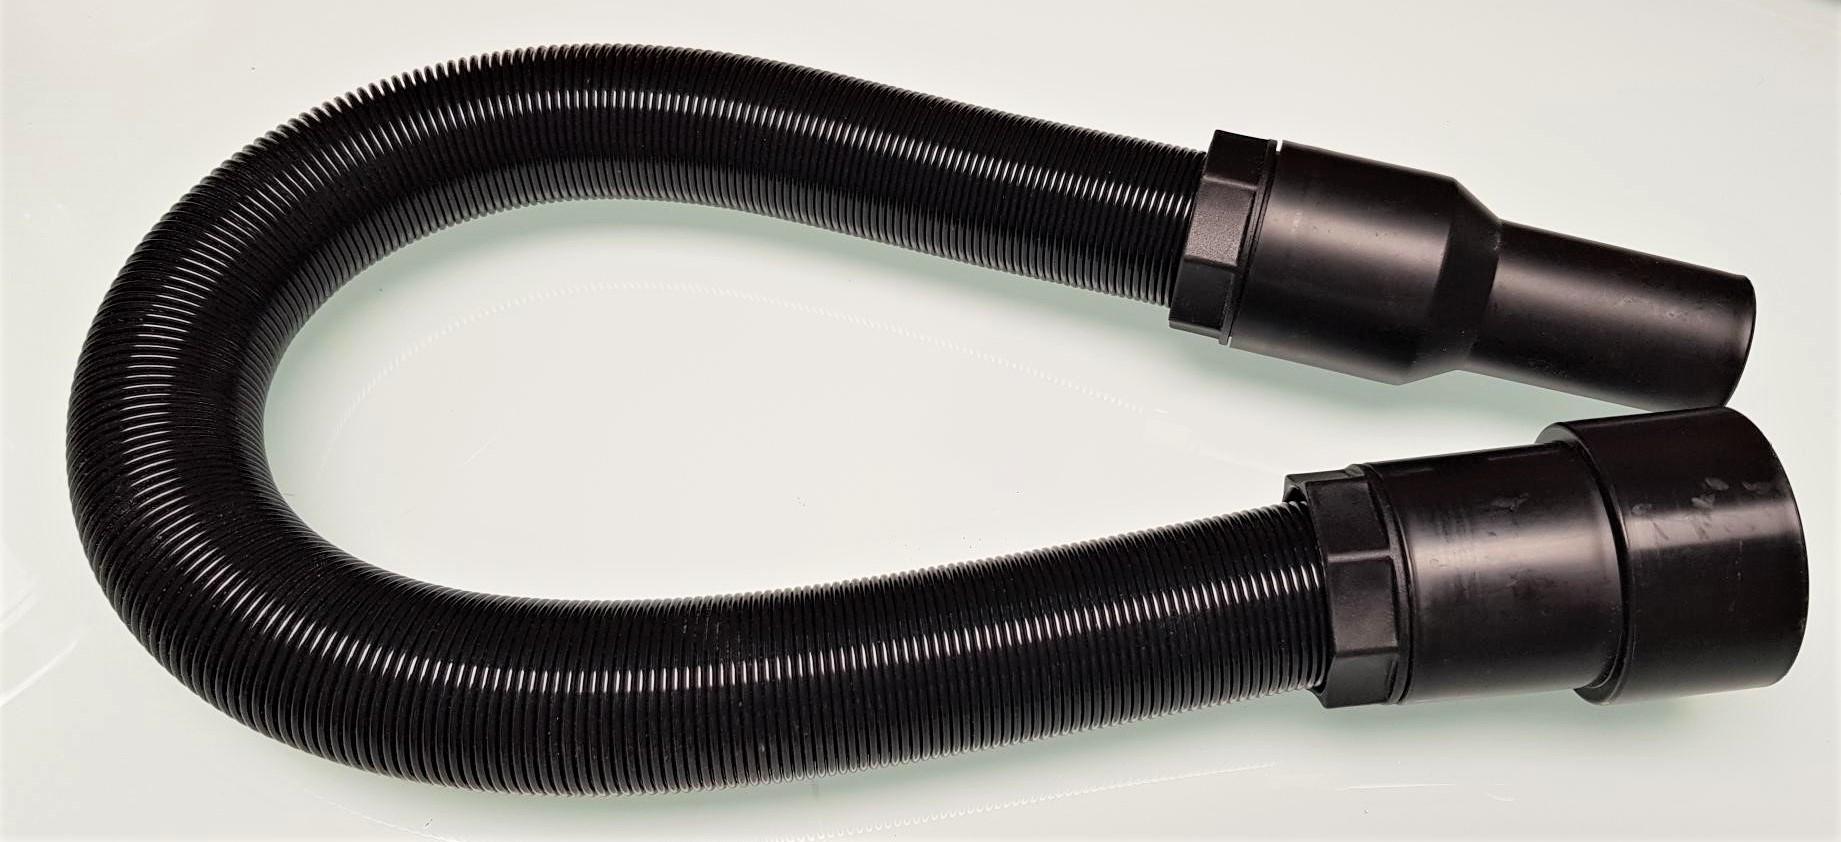 Fumagalli MG88HT / 9000HT replacement hose for hair dryer